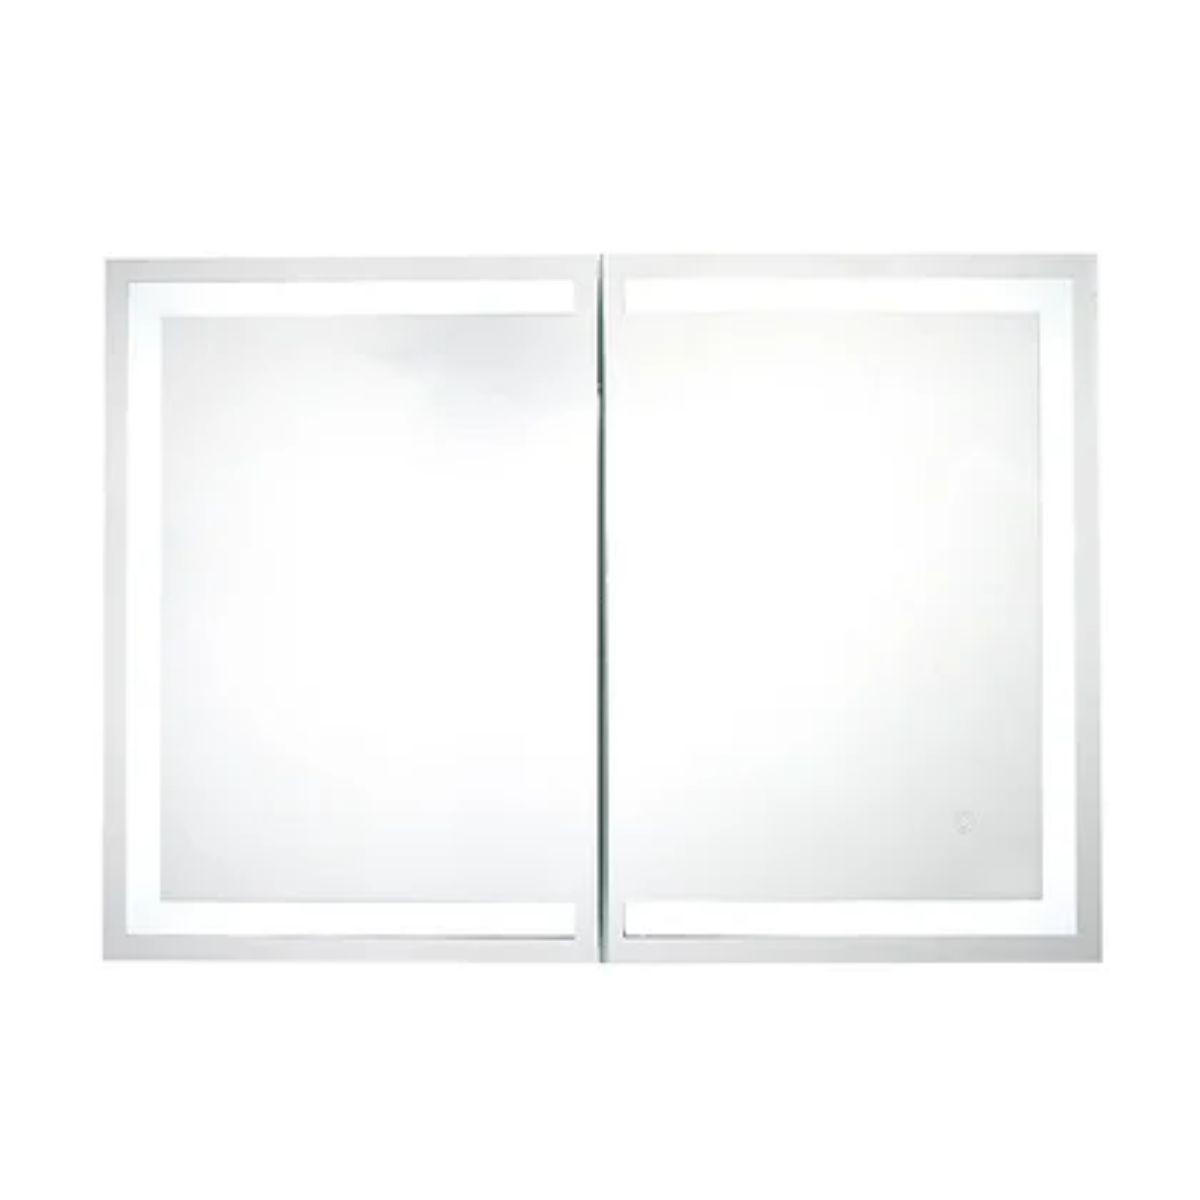 Edison 34 In. X 24 In. Tri-color LED Bluetooth Dual Door Cabinet Mirror With Touch On/Off Dimmer Function